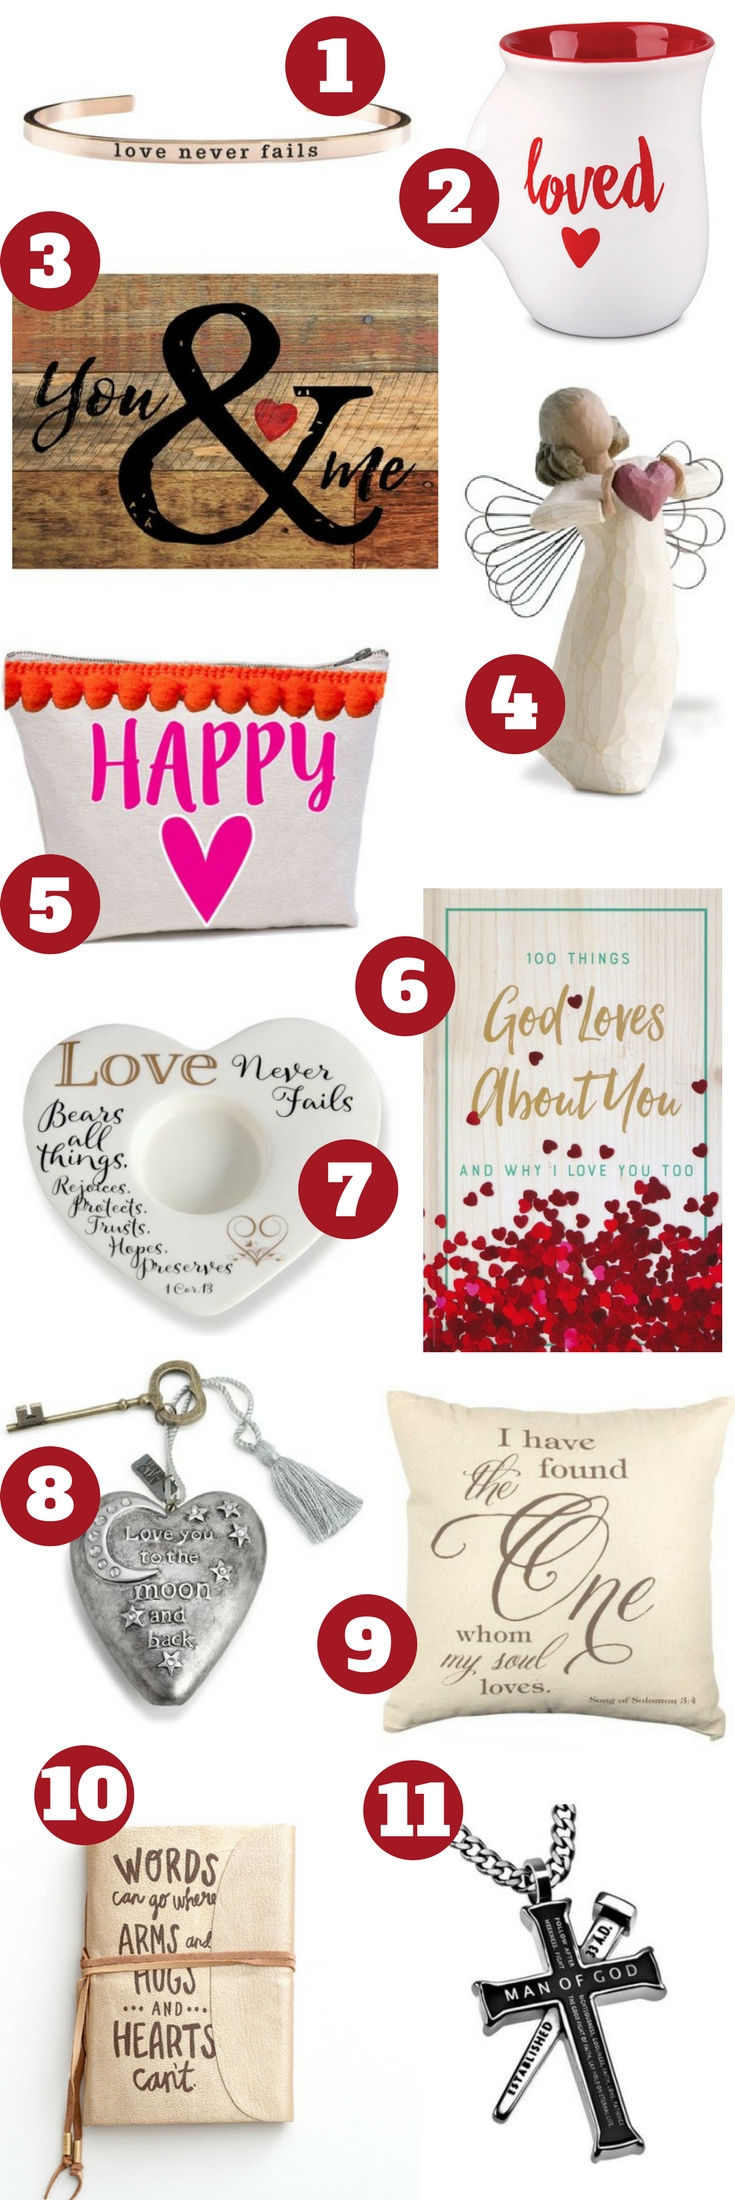 Gifts for Valentine's Day